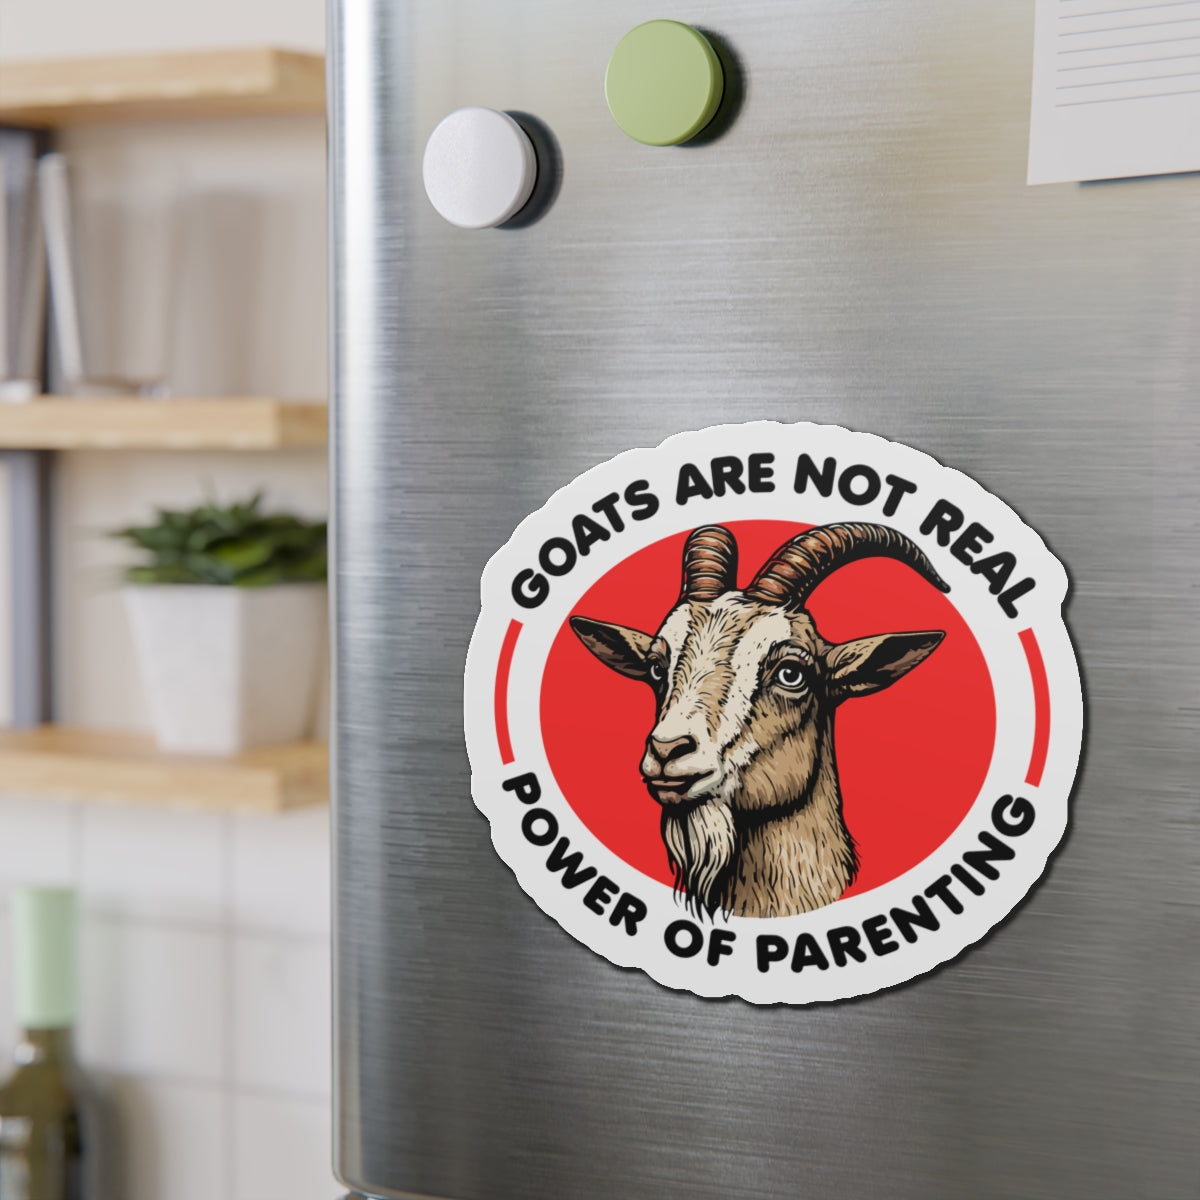 Goats Are Not Real, Power Of Parenting Die-Cut Magnet